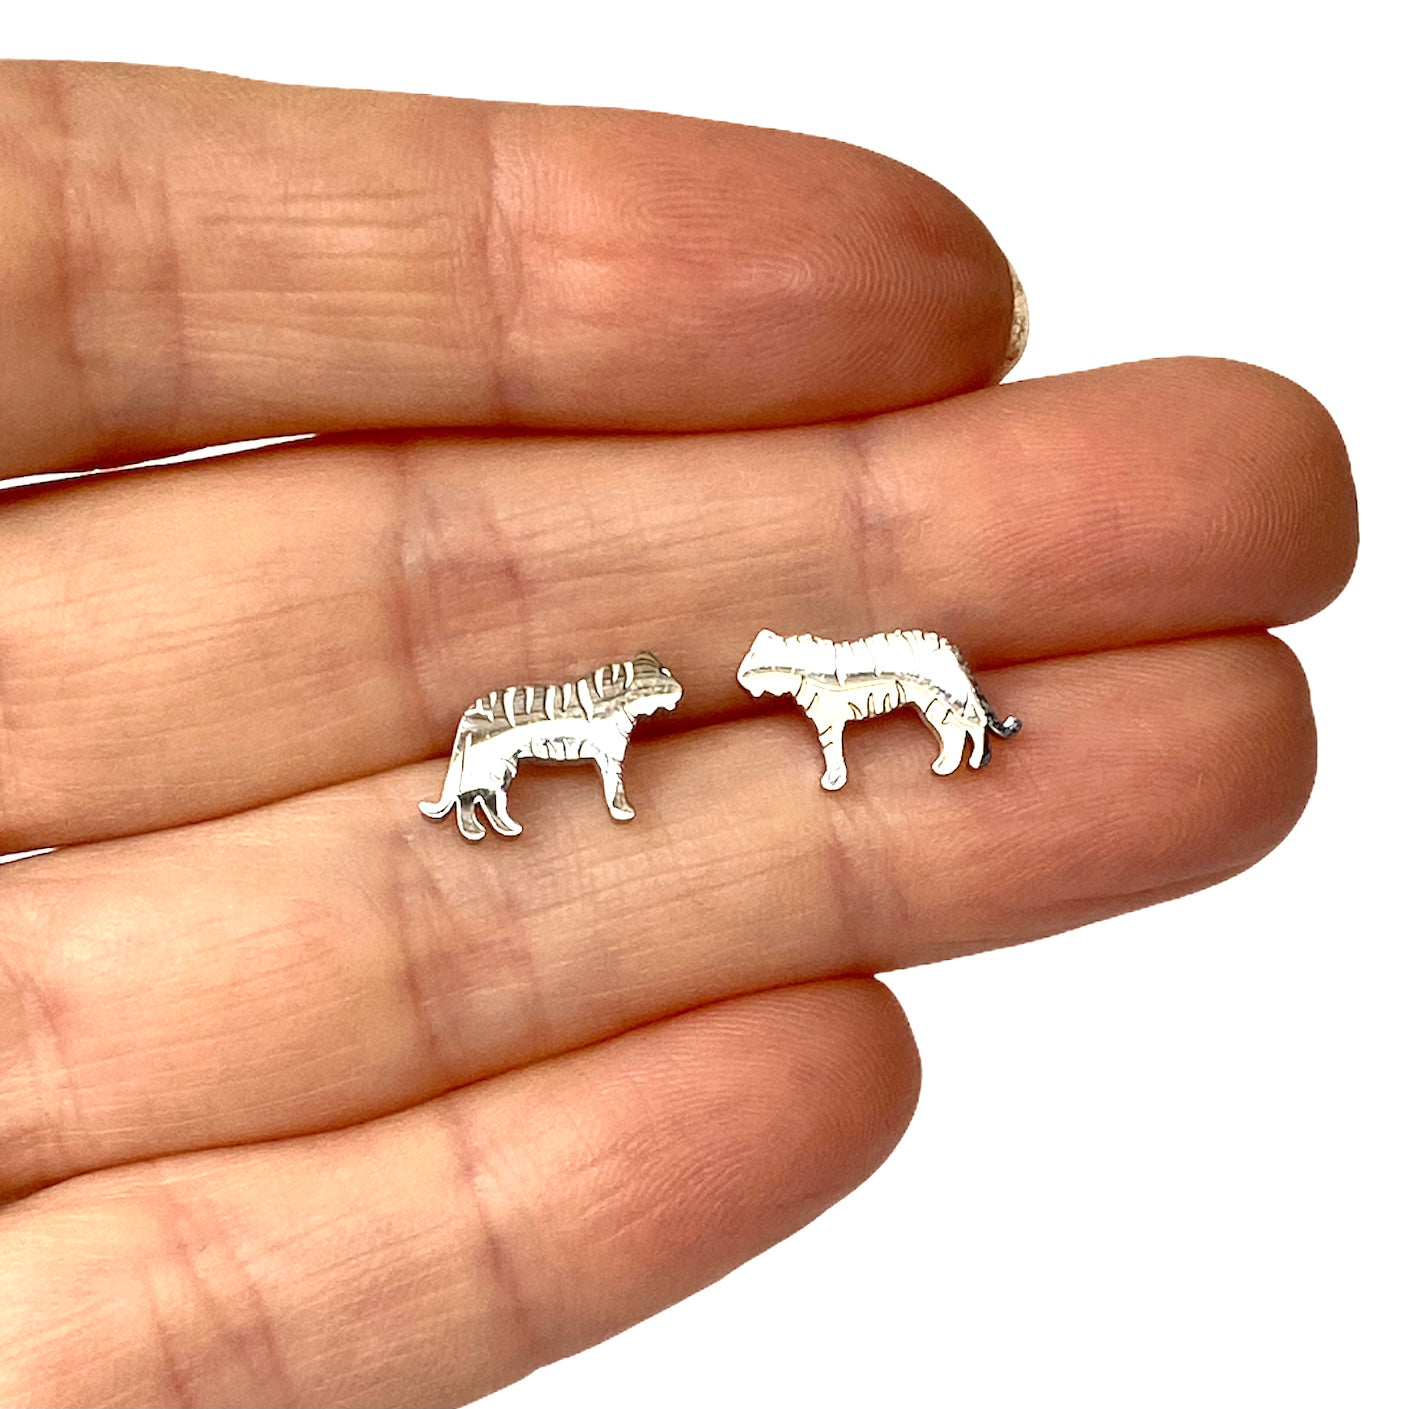 Tiger Earring Studs Silver